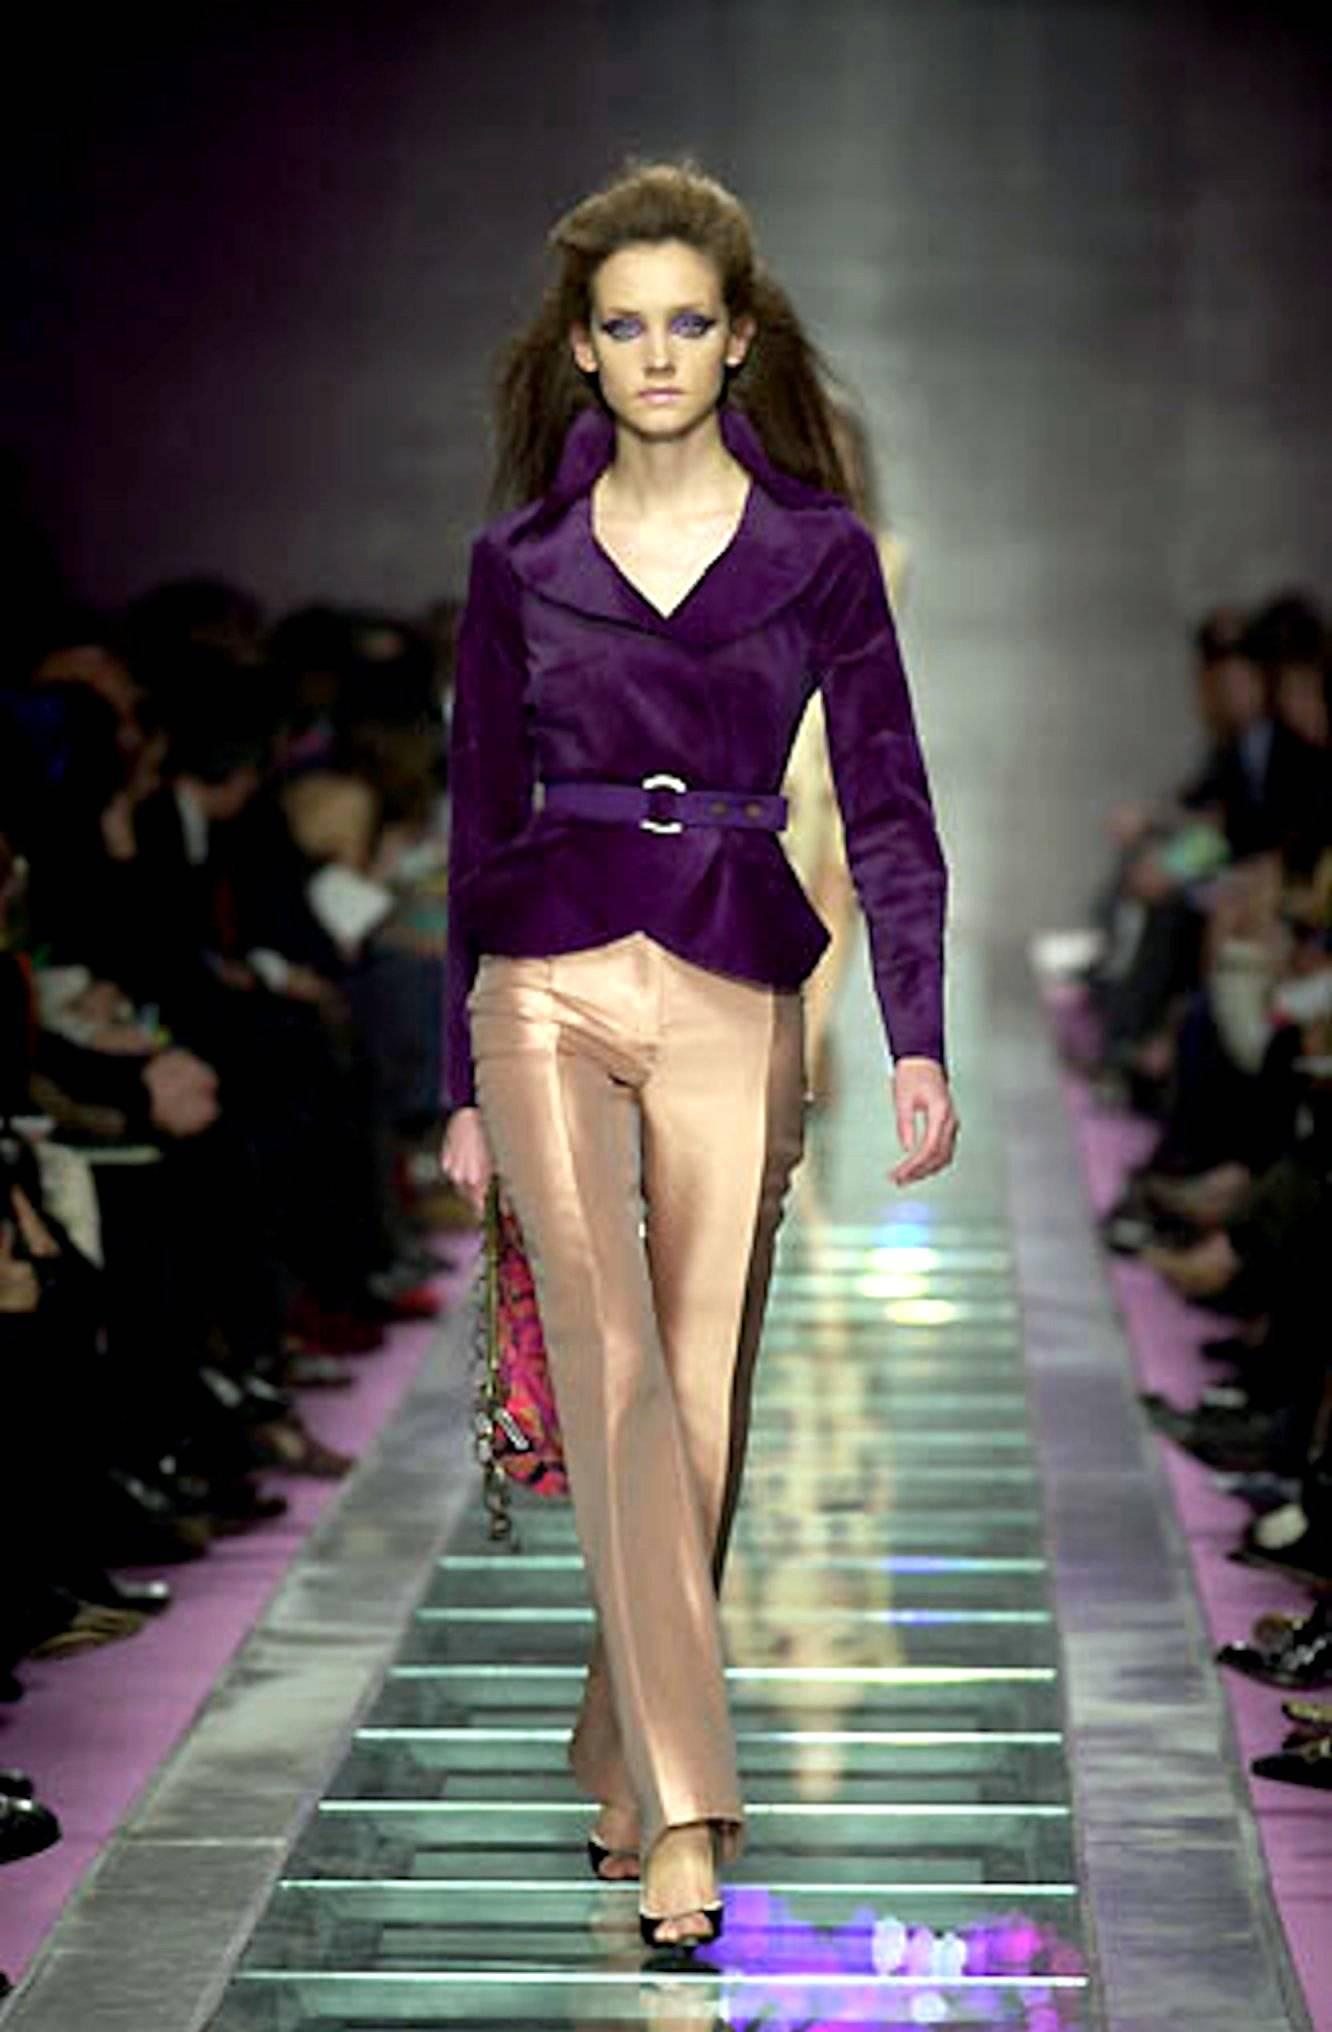 NEW Gianni Versace Couture FW 2000 Purple Fur Jacket Coat 42 For Sale 1